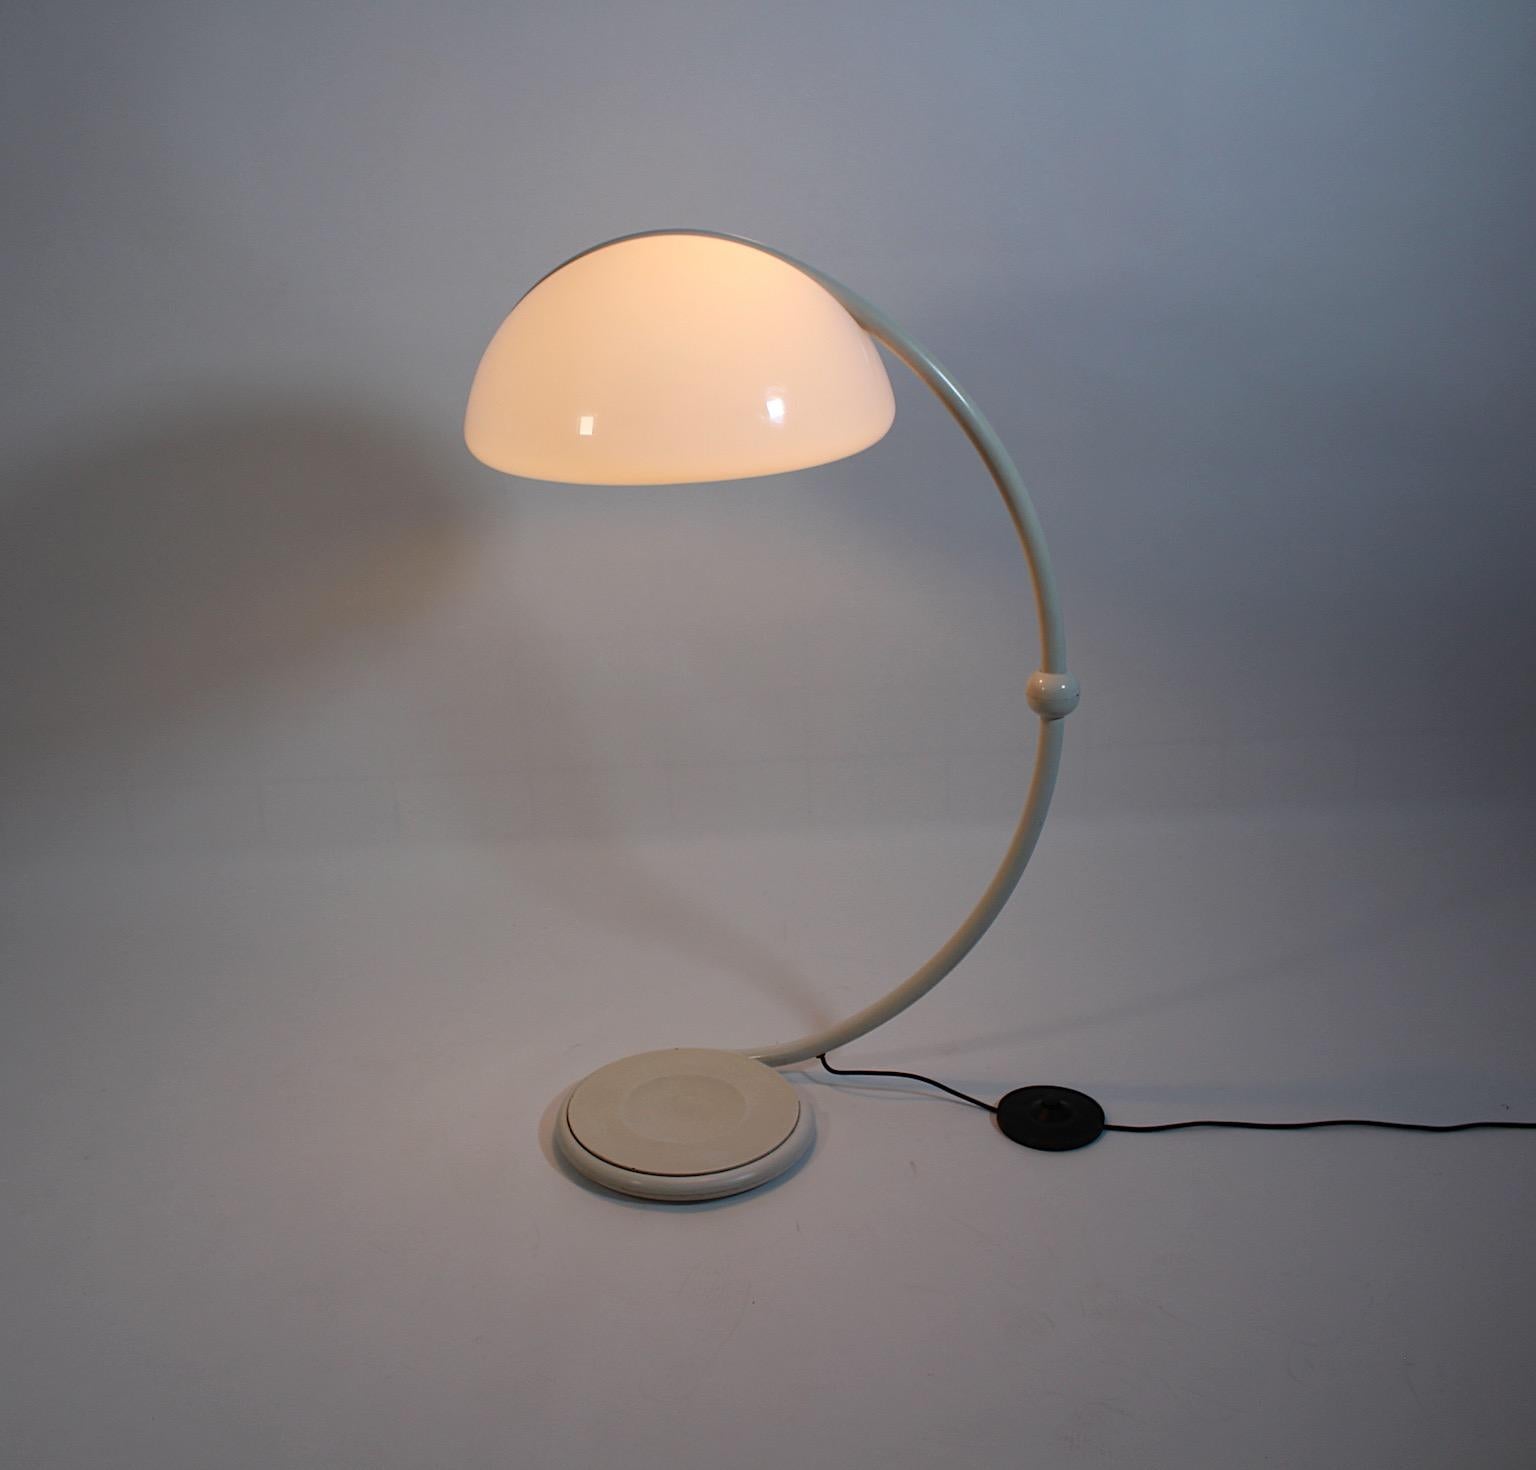 Modern Space Age Vintage Floor Lamp White Plastic Metal Elio Martinelli 1970s Italy For Sale